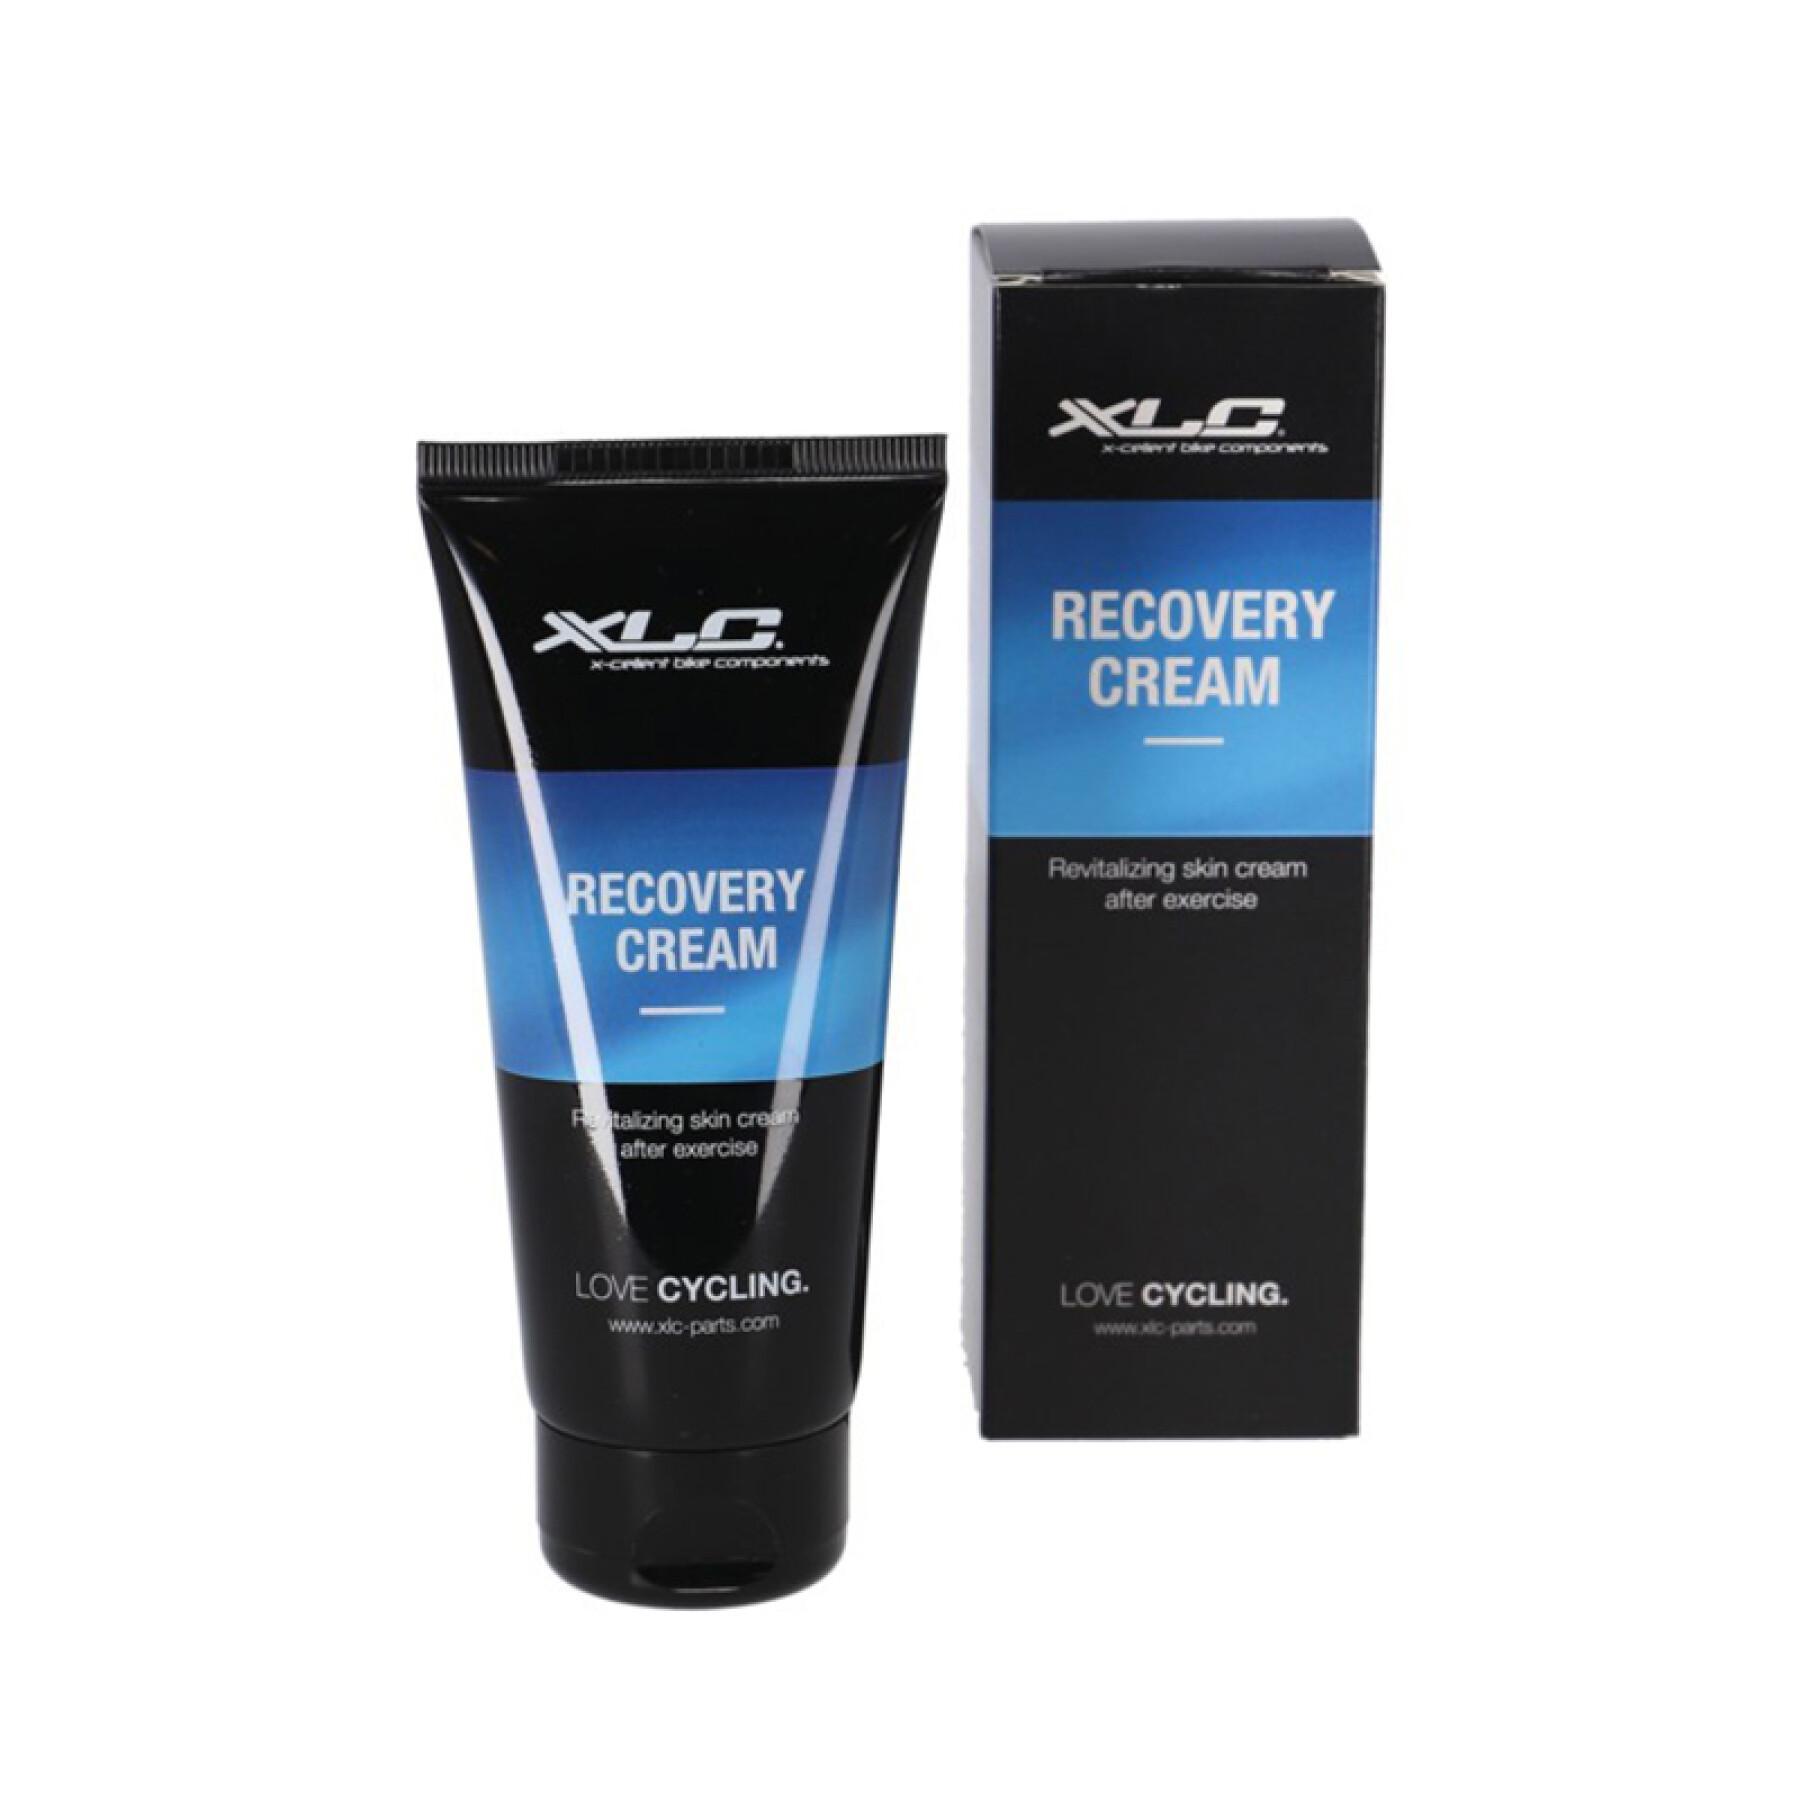 Recovery cream after exercise XLC pm-c05